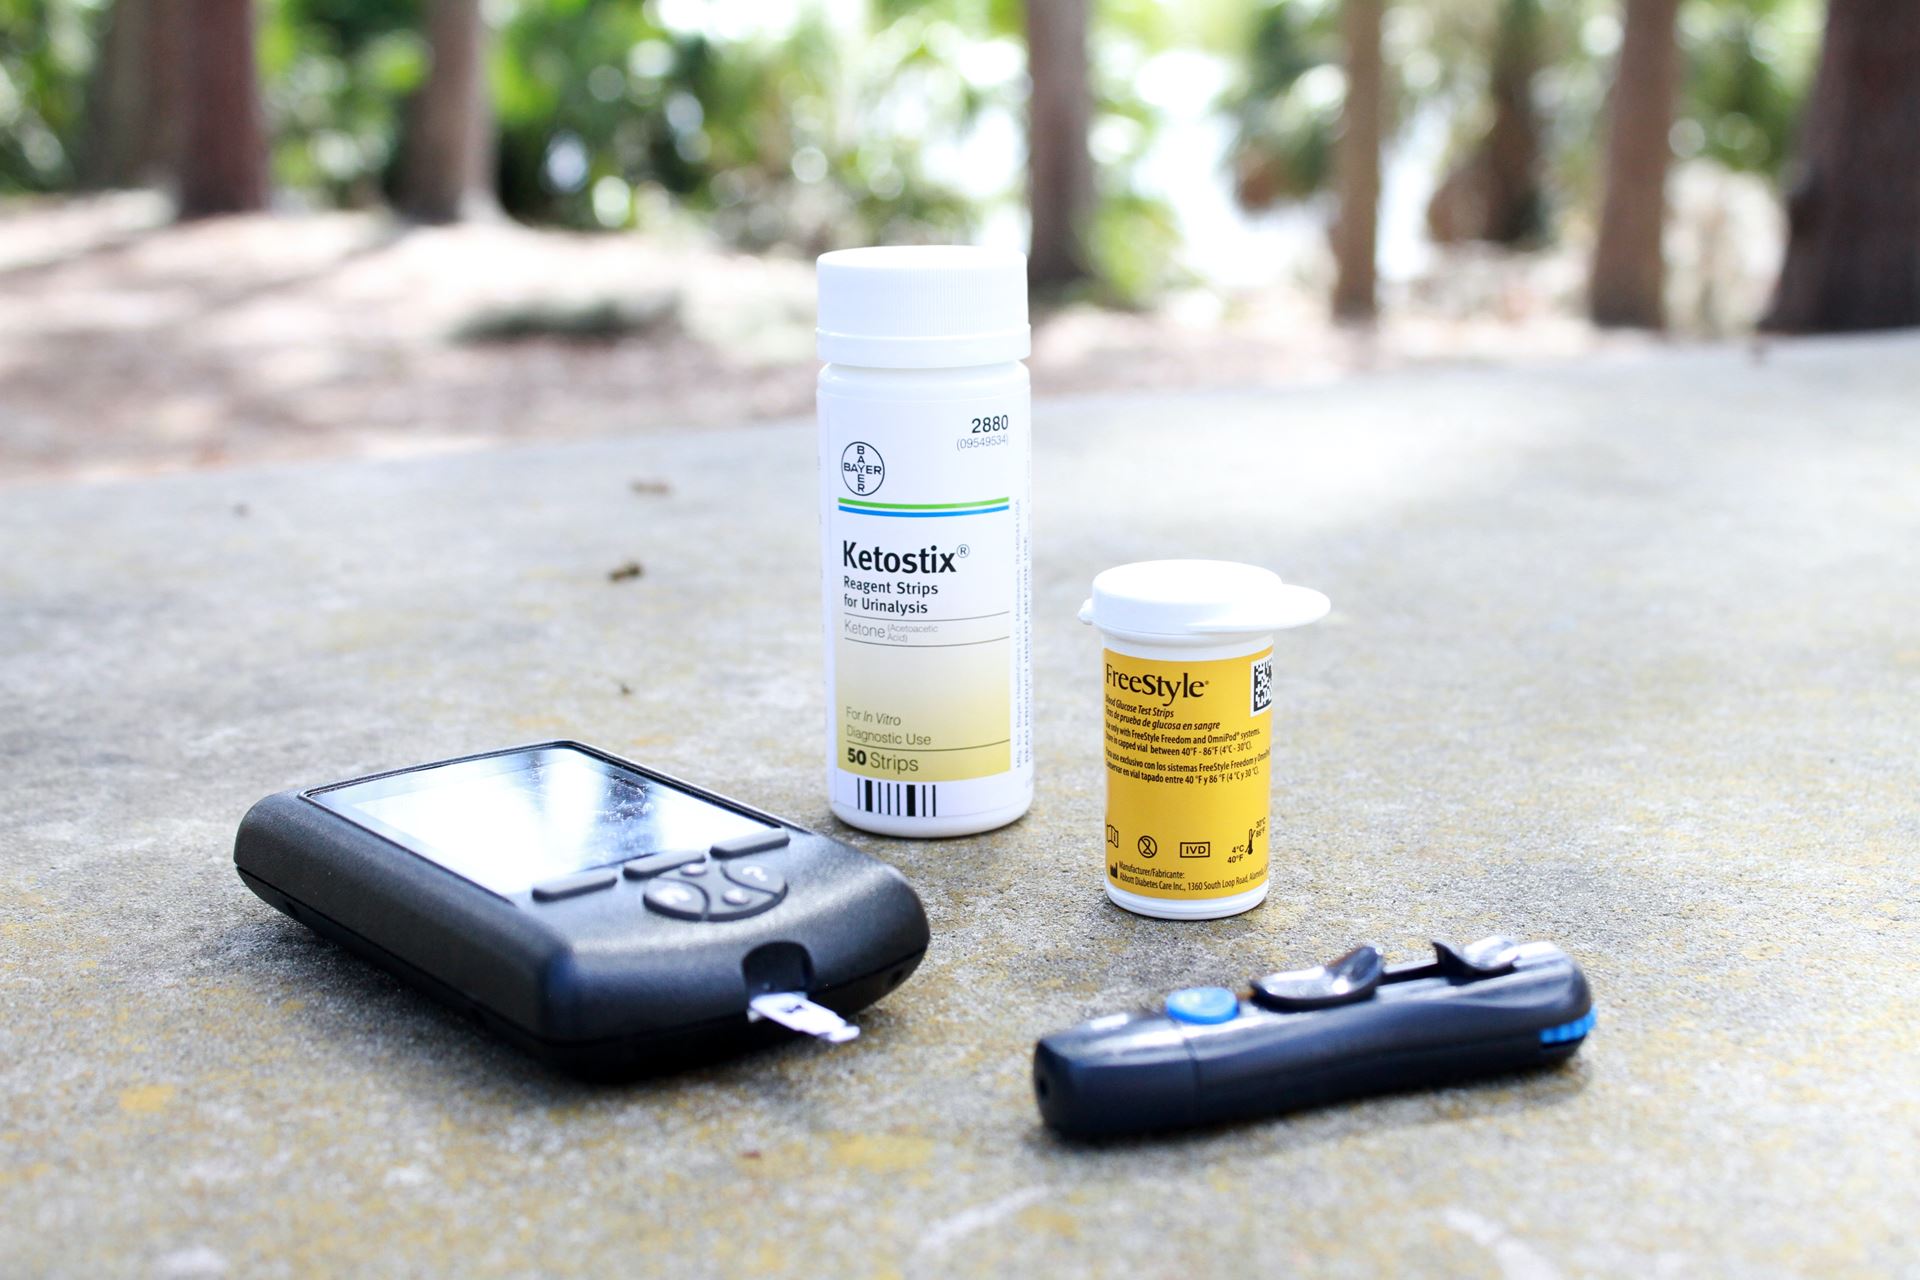 Glucometer for blood sugar testing with test strips